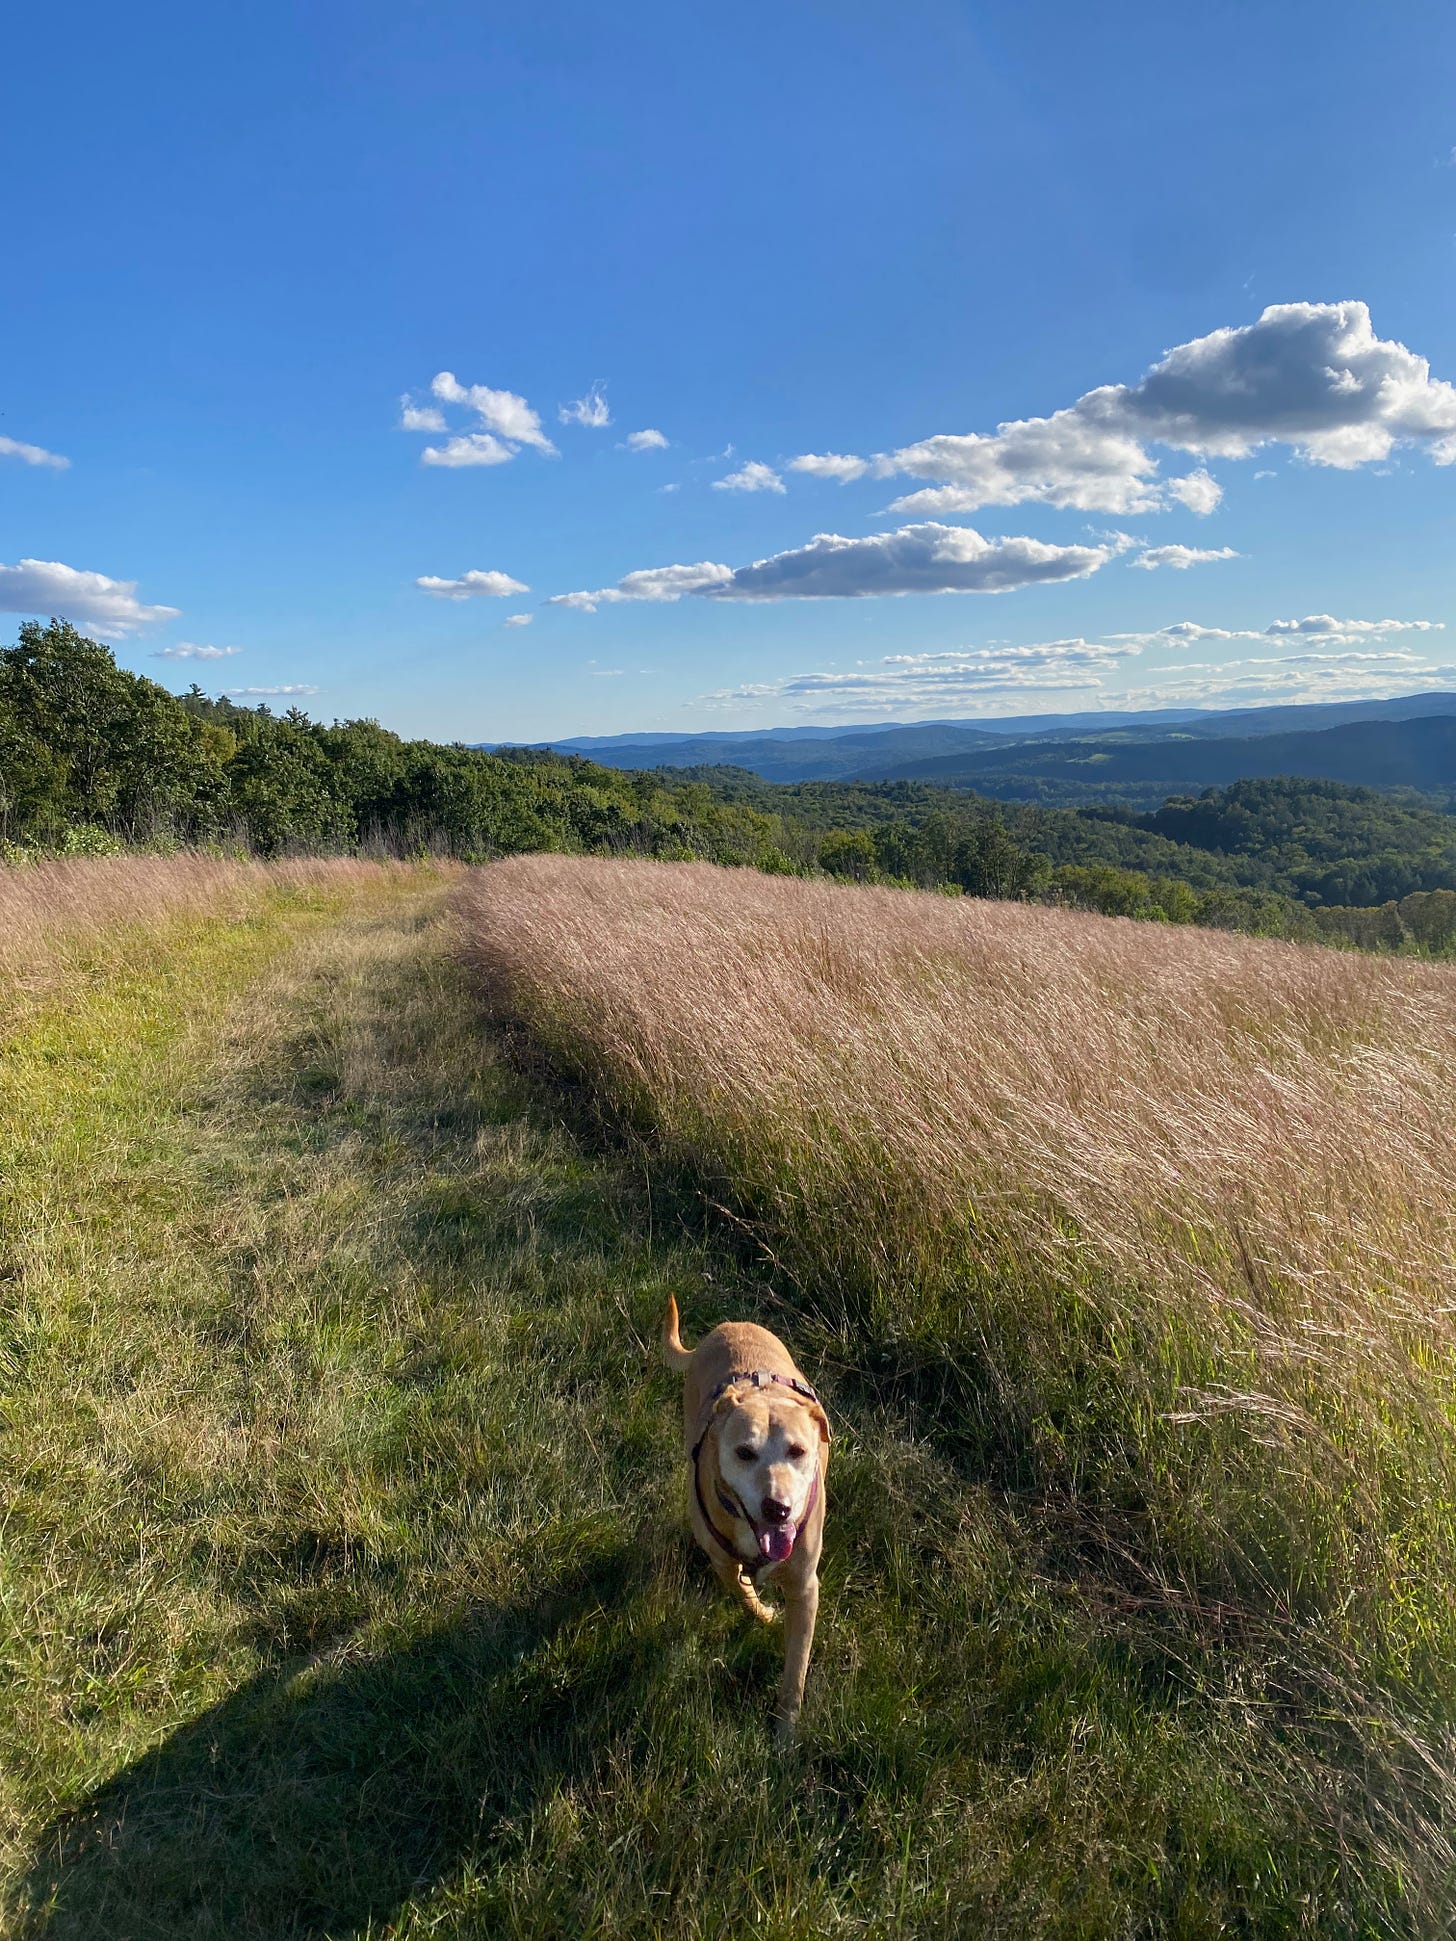 Nessa running toward the camera on a grassy path on a ridgetop. The sky is blue and full of small white clouds; there are hills in the distance.